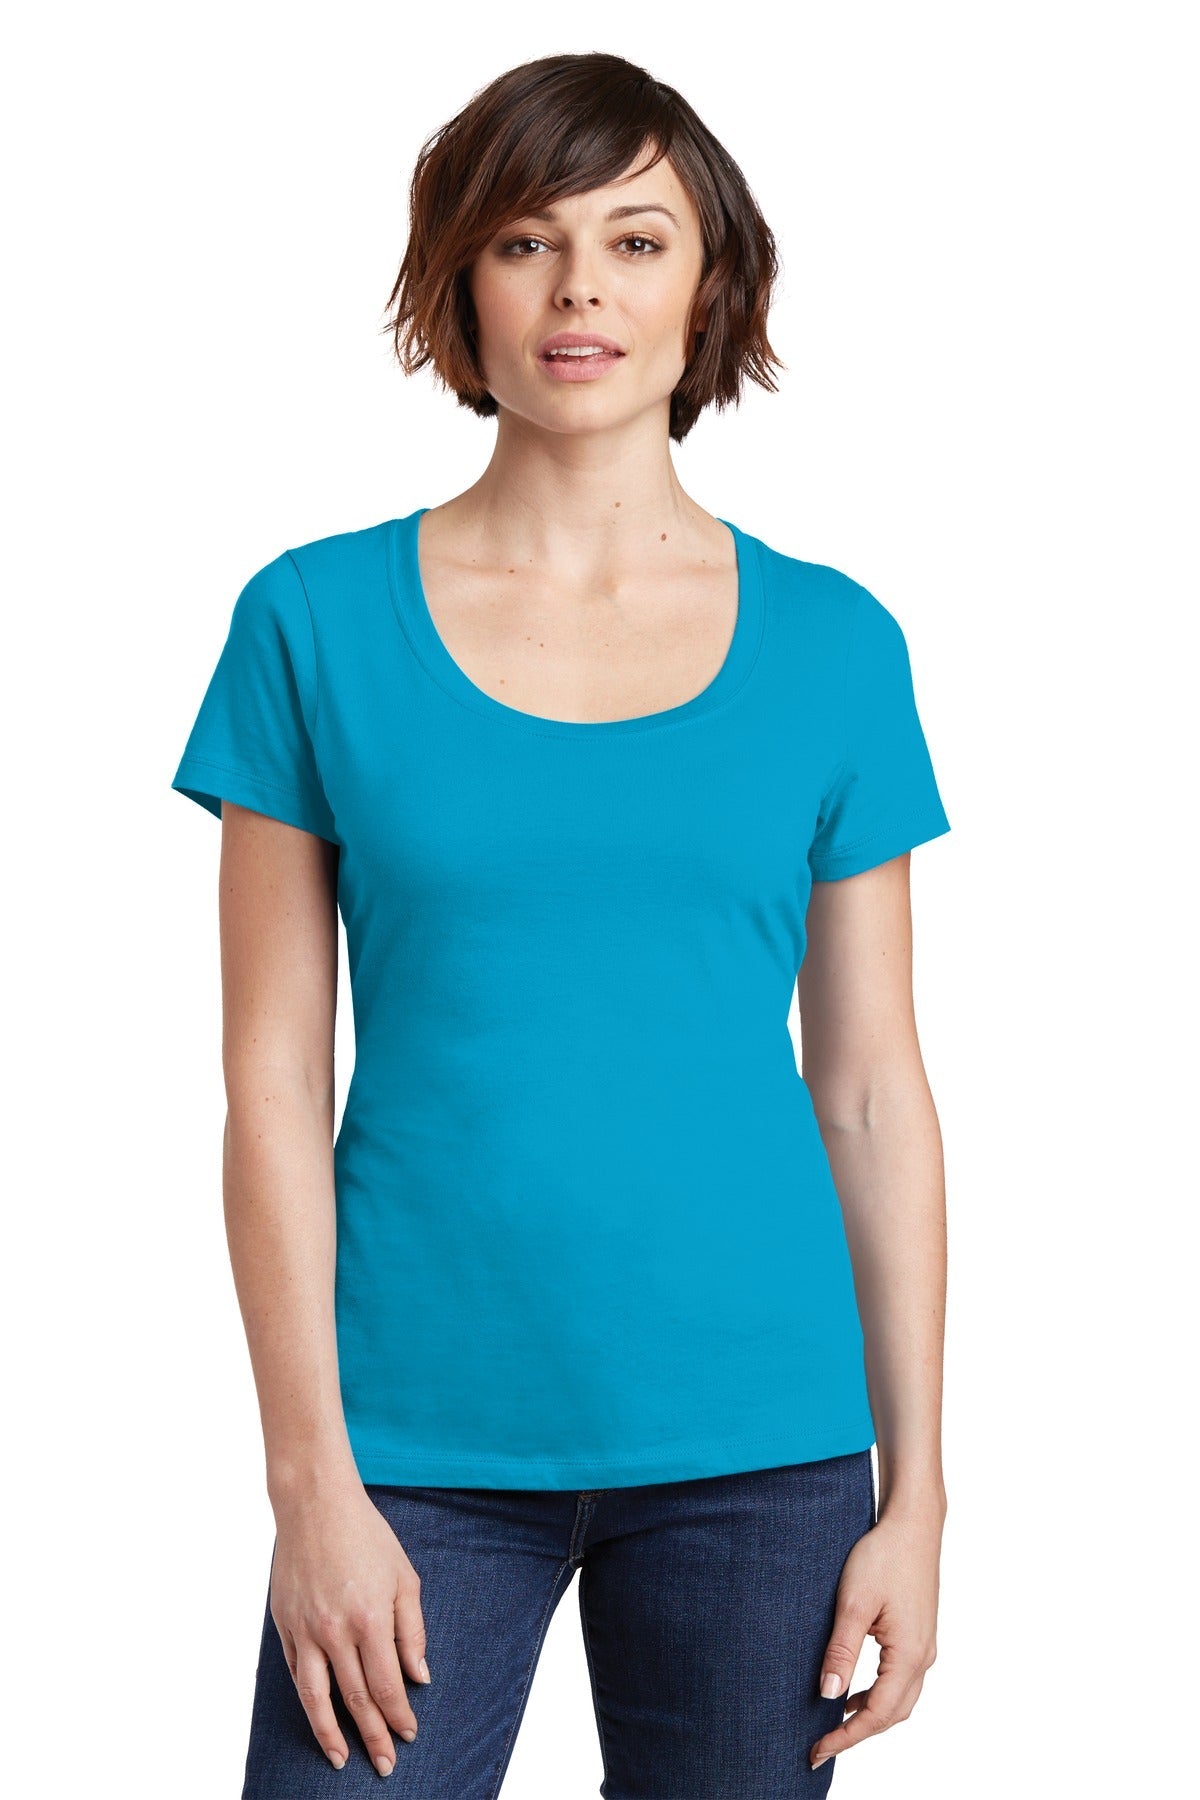 District® Women's Perfect Weight® Scoop Tee. DM106L - DFW Impression